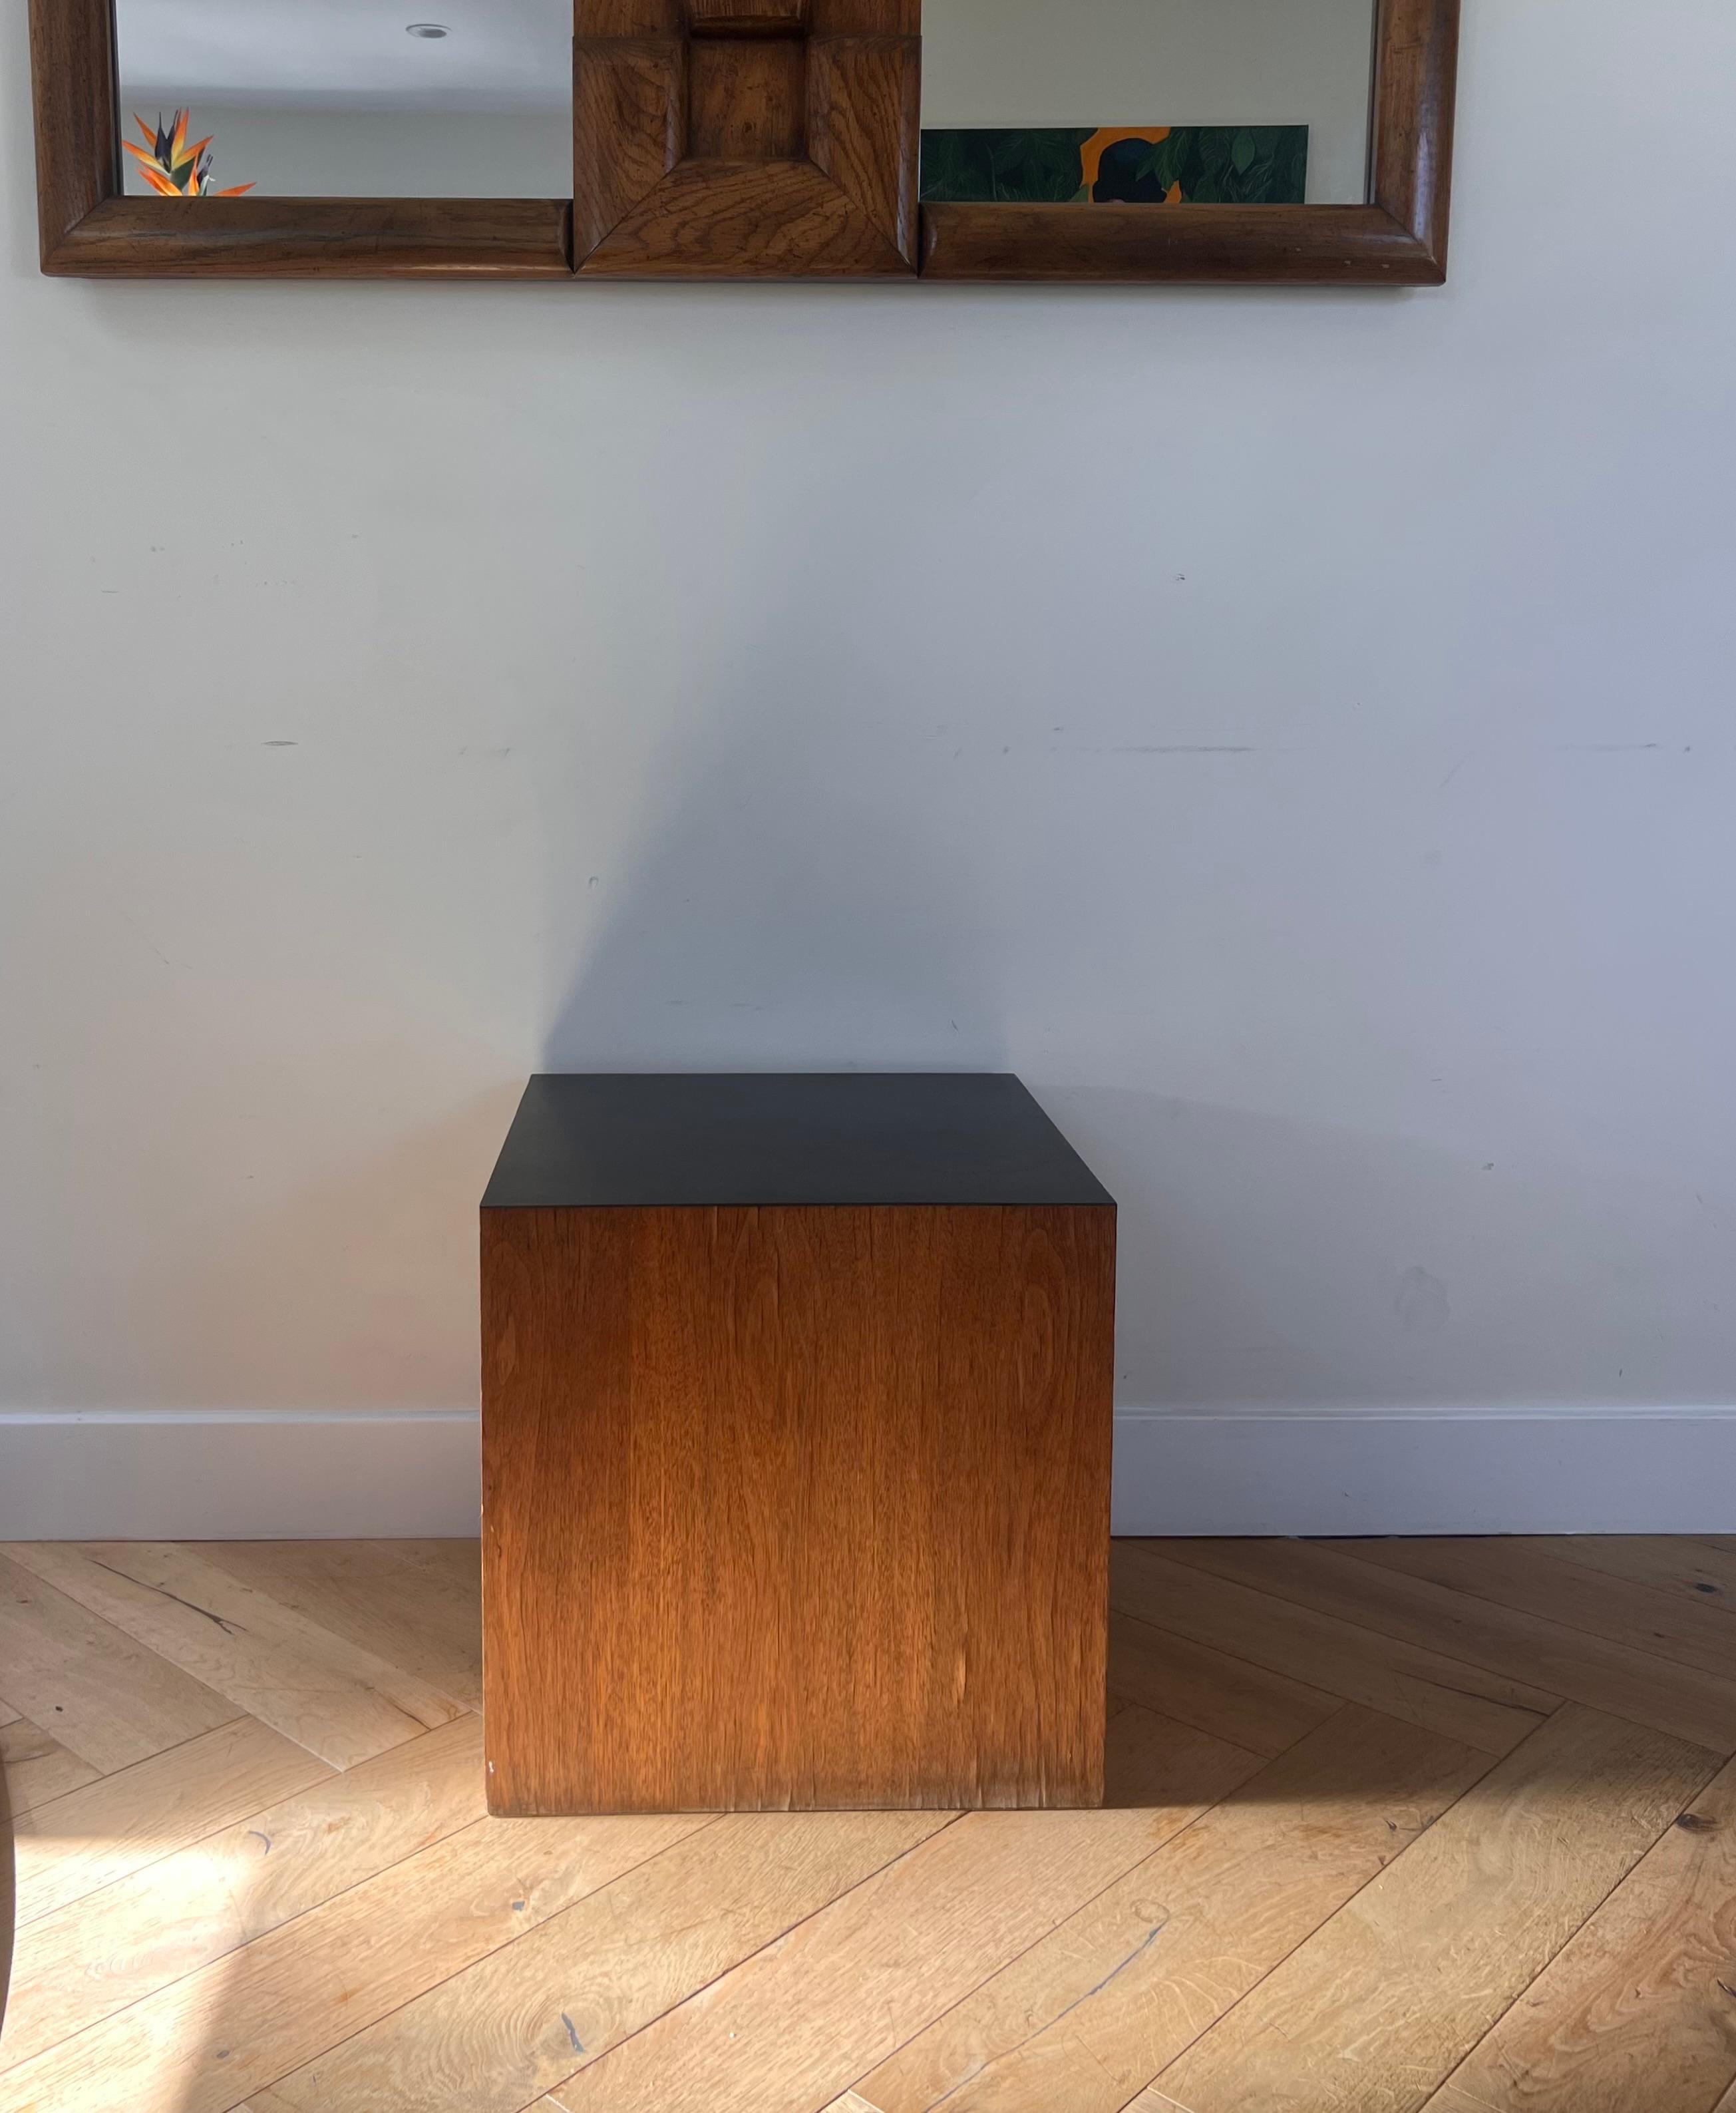 A modernist wood veneer and laminate cube pedestal / end table, circa 1970. One side is black laminate, the other side is white laminate.
Some of the veneer is rippling here and there, but otherwise good vintage condition. Pick up in central West